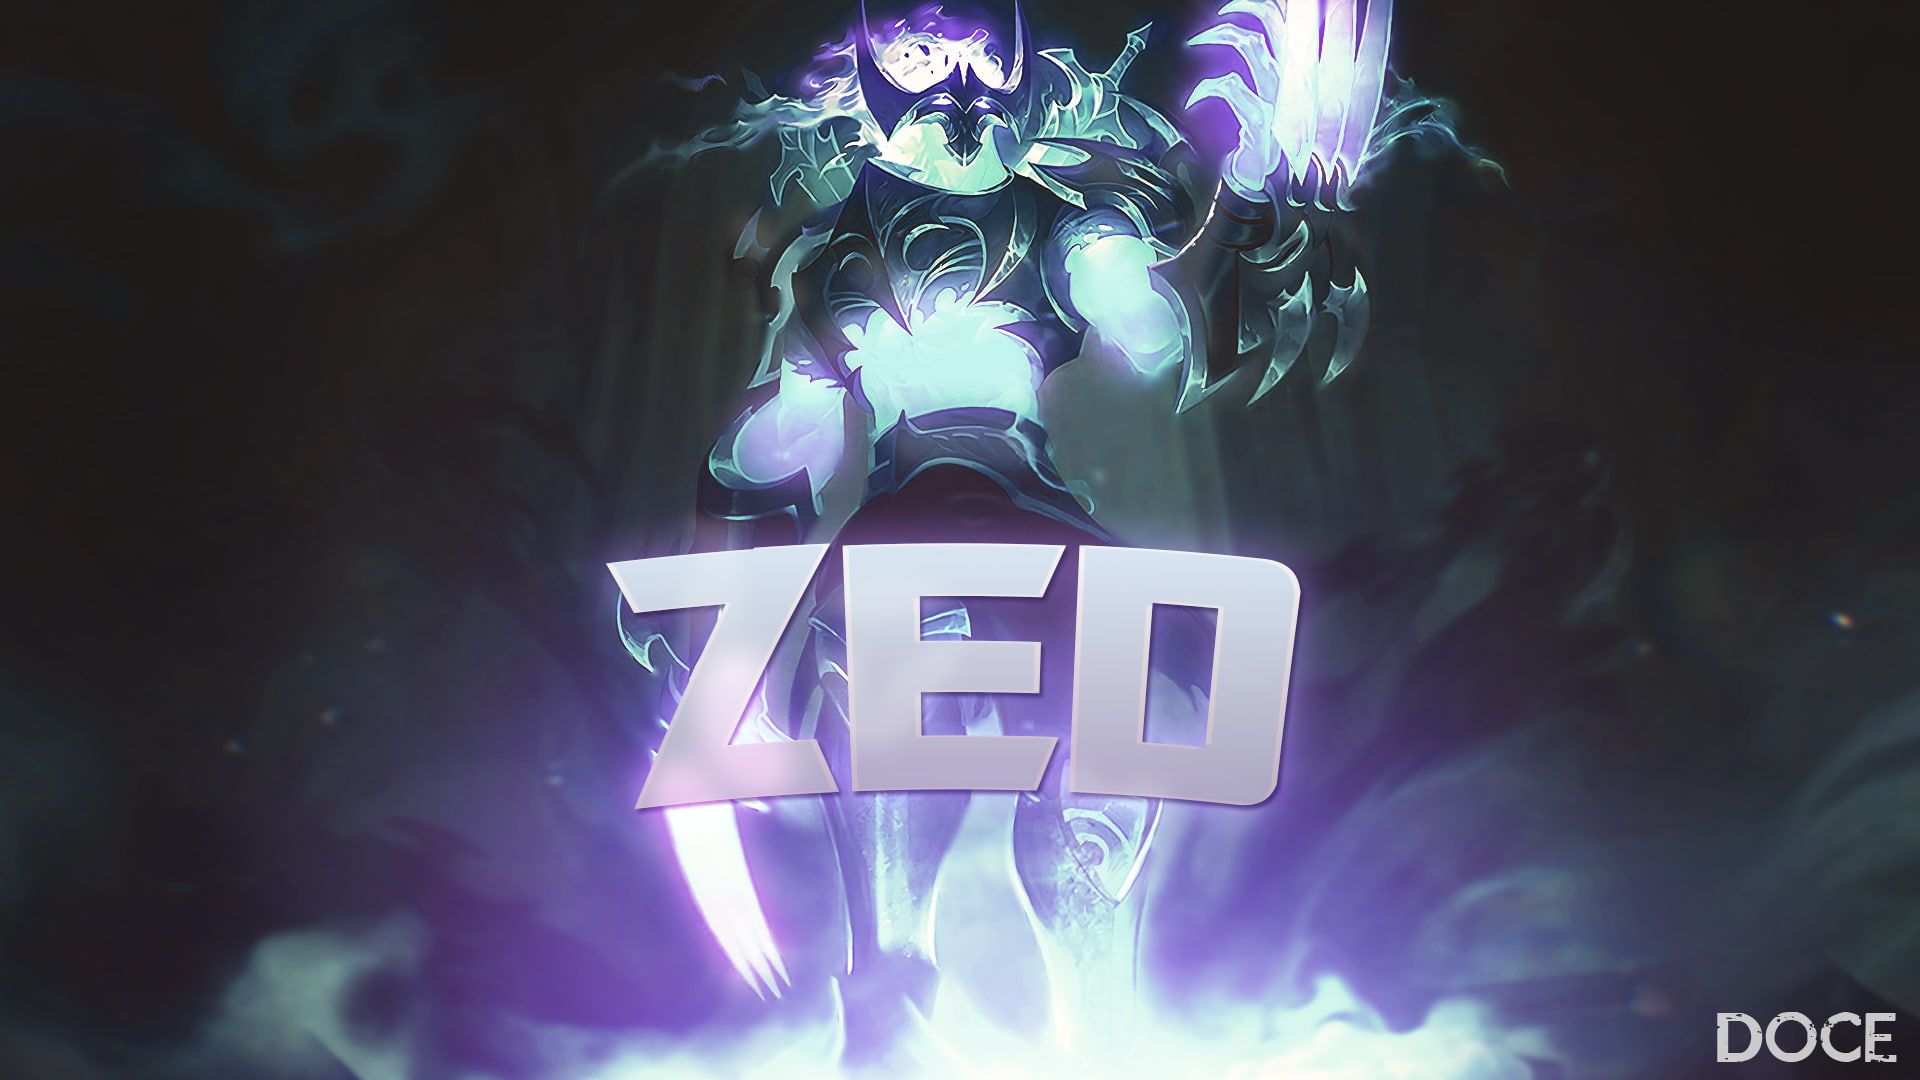 Zed, League of Legends, illuminated, night, low angle view